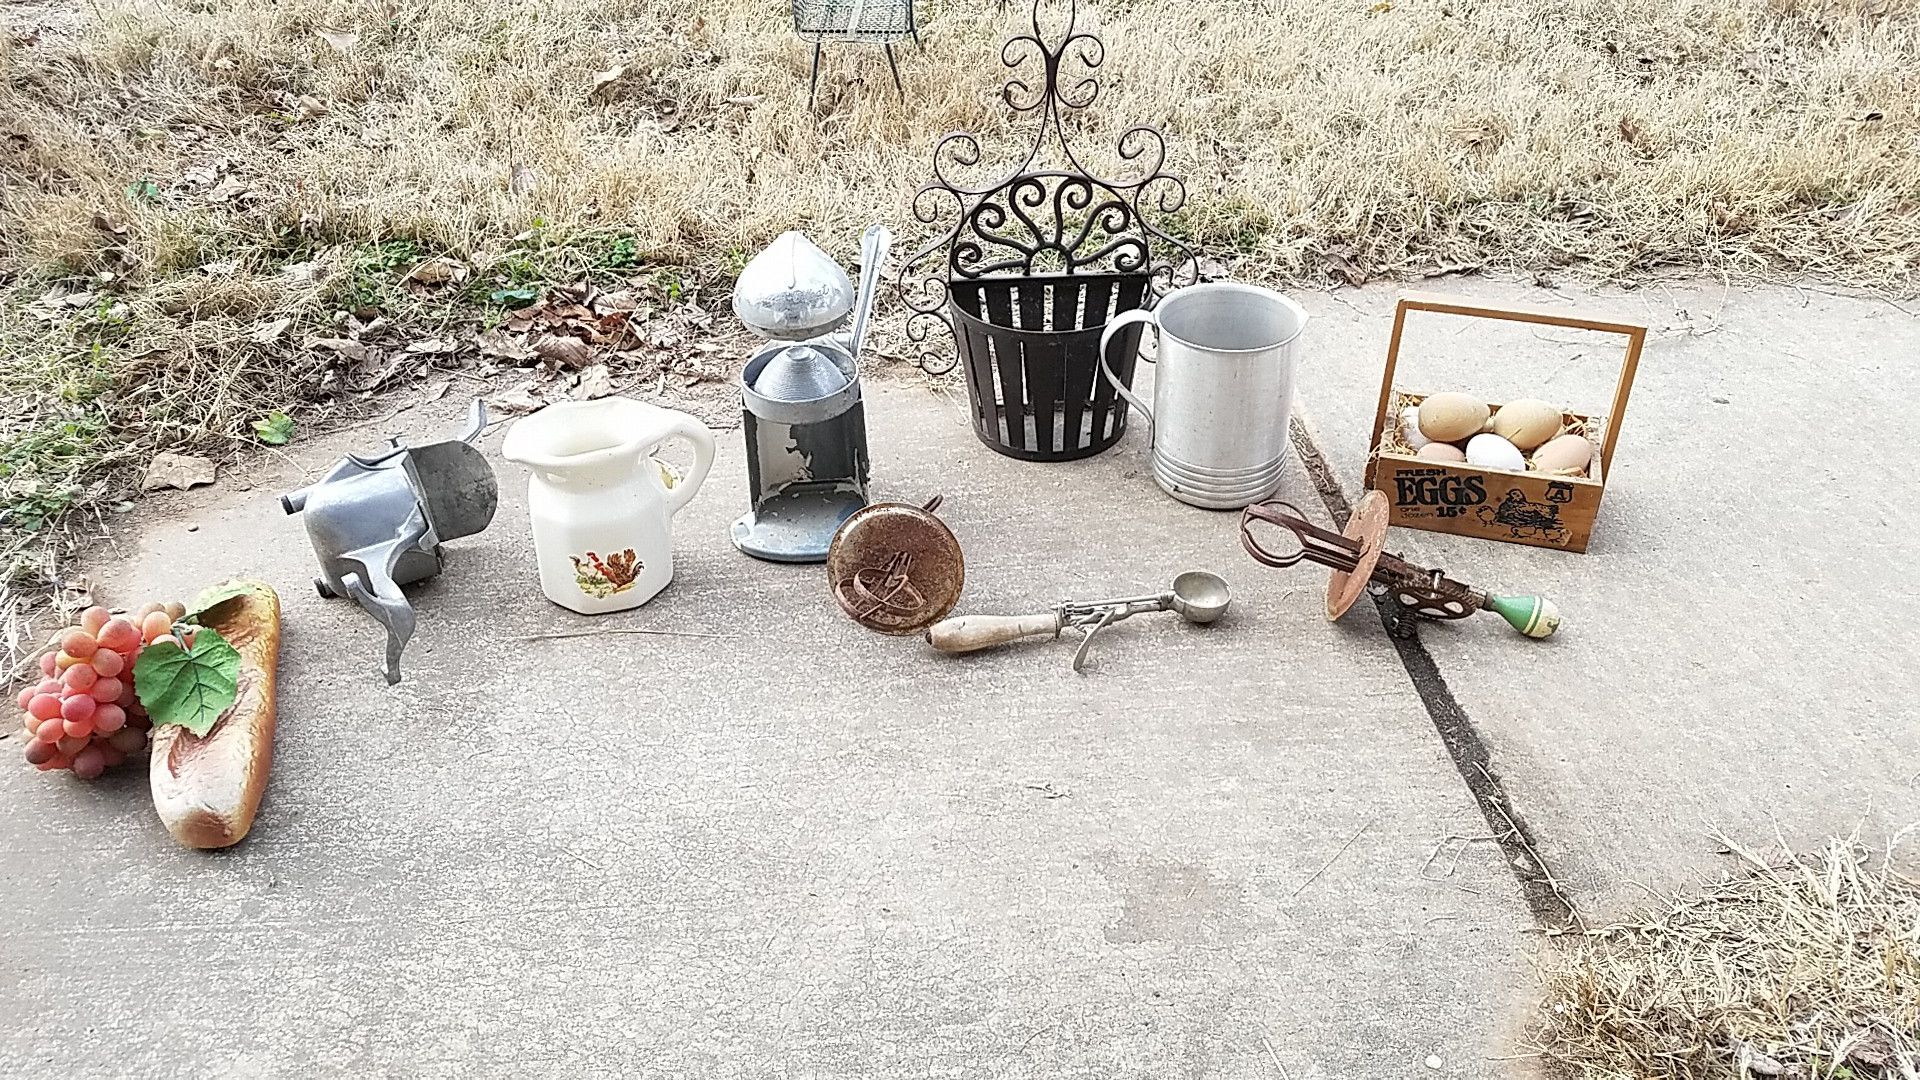 Old kitchen utensils and misc.